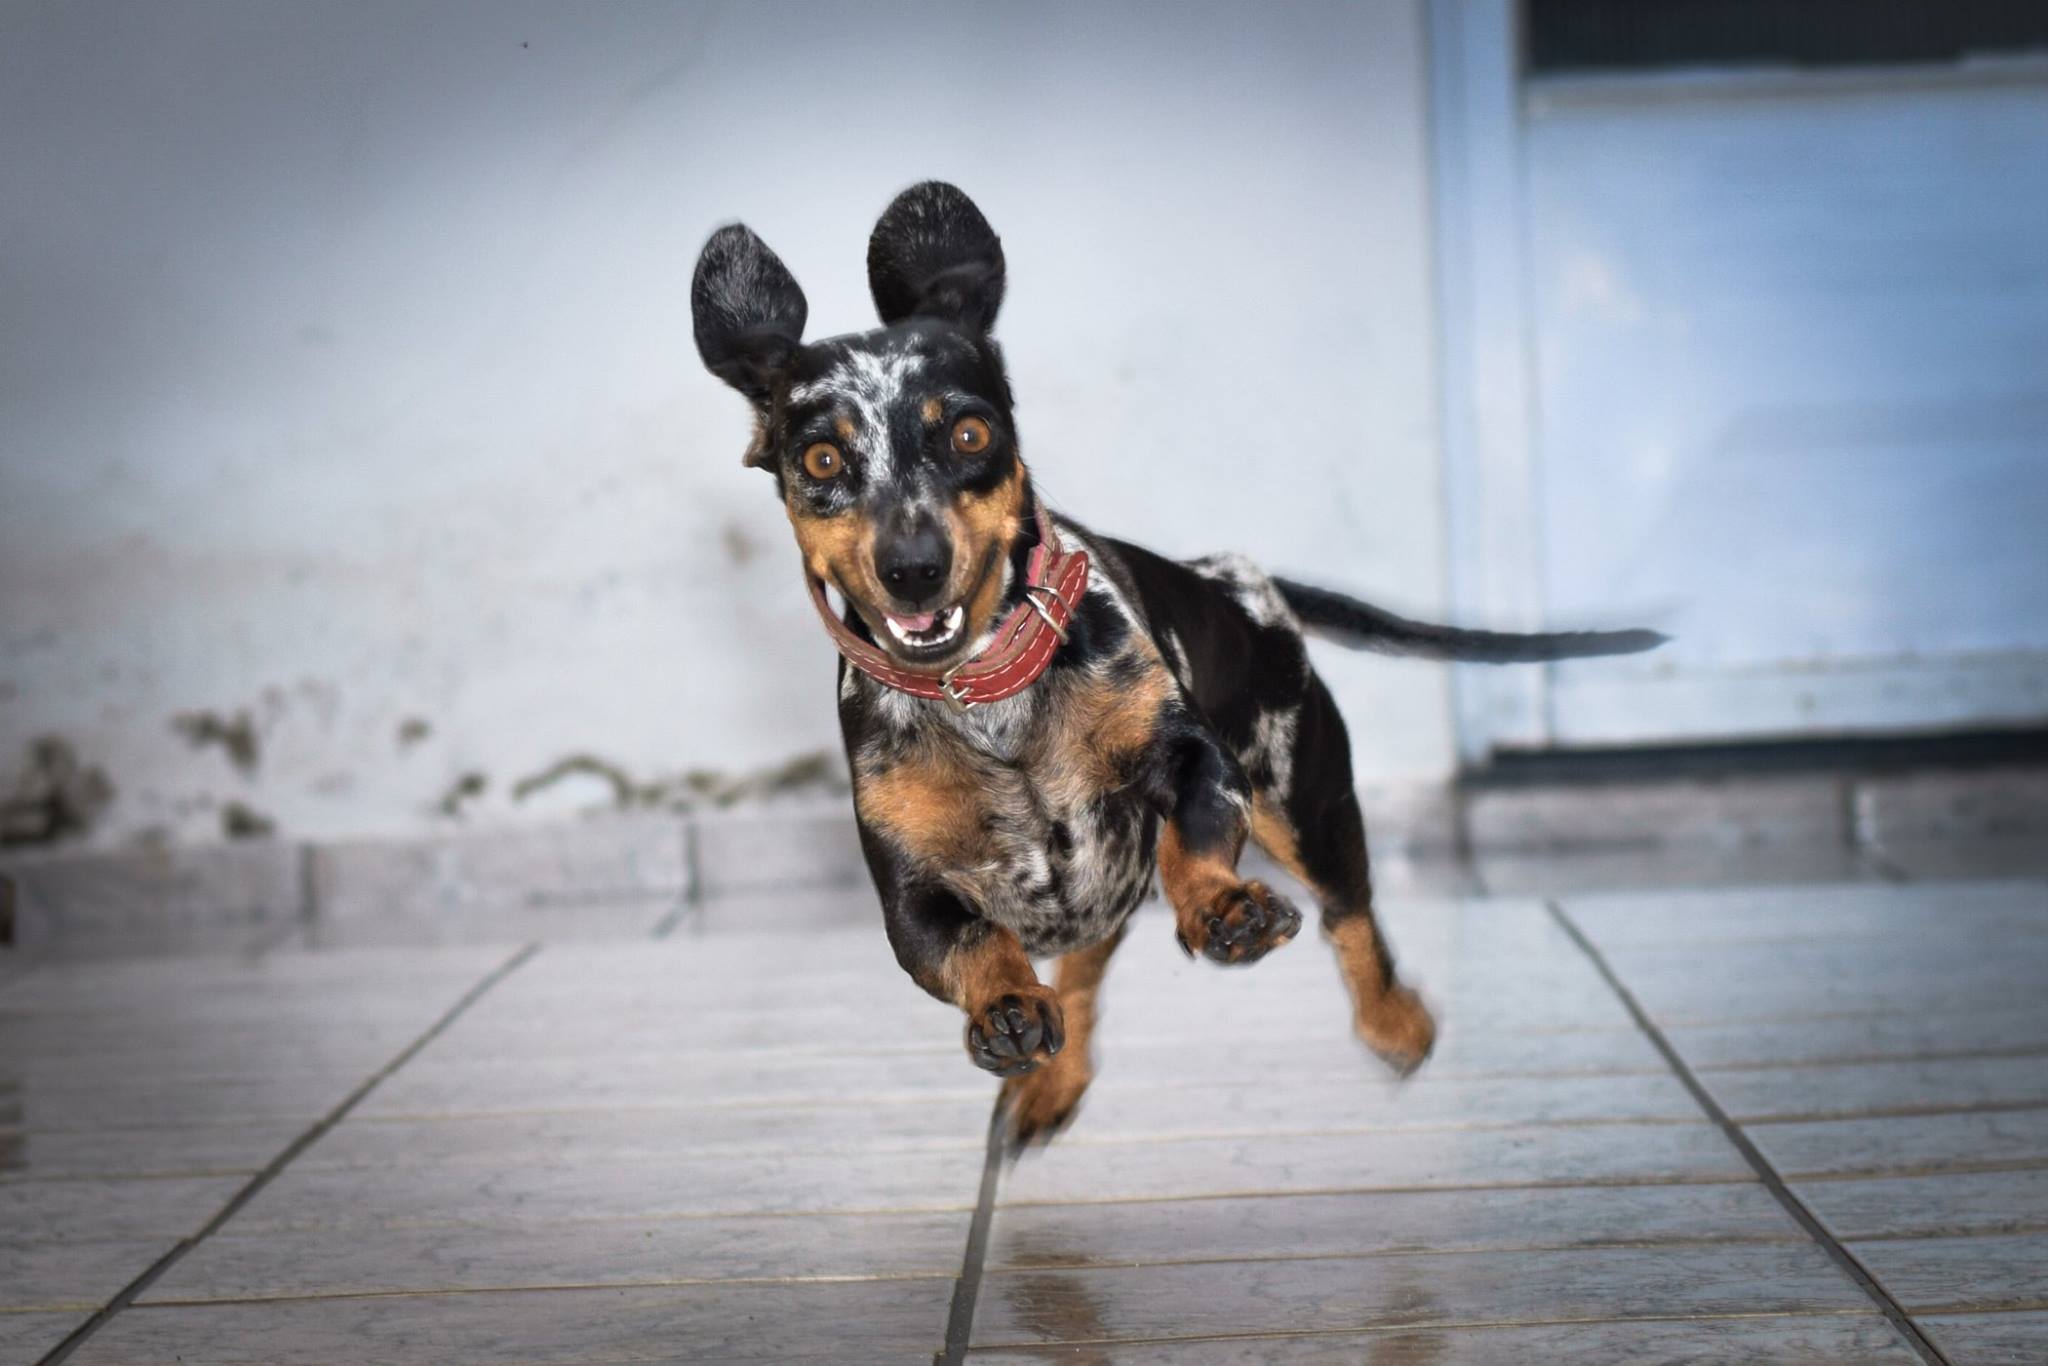 A Dachshund running with its happy face